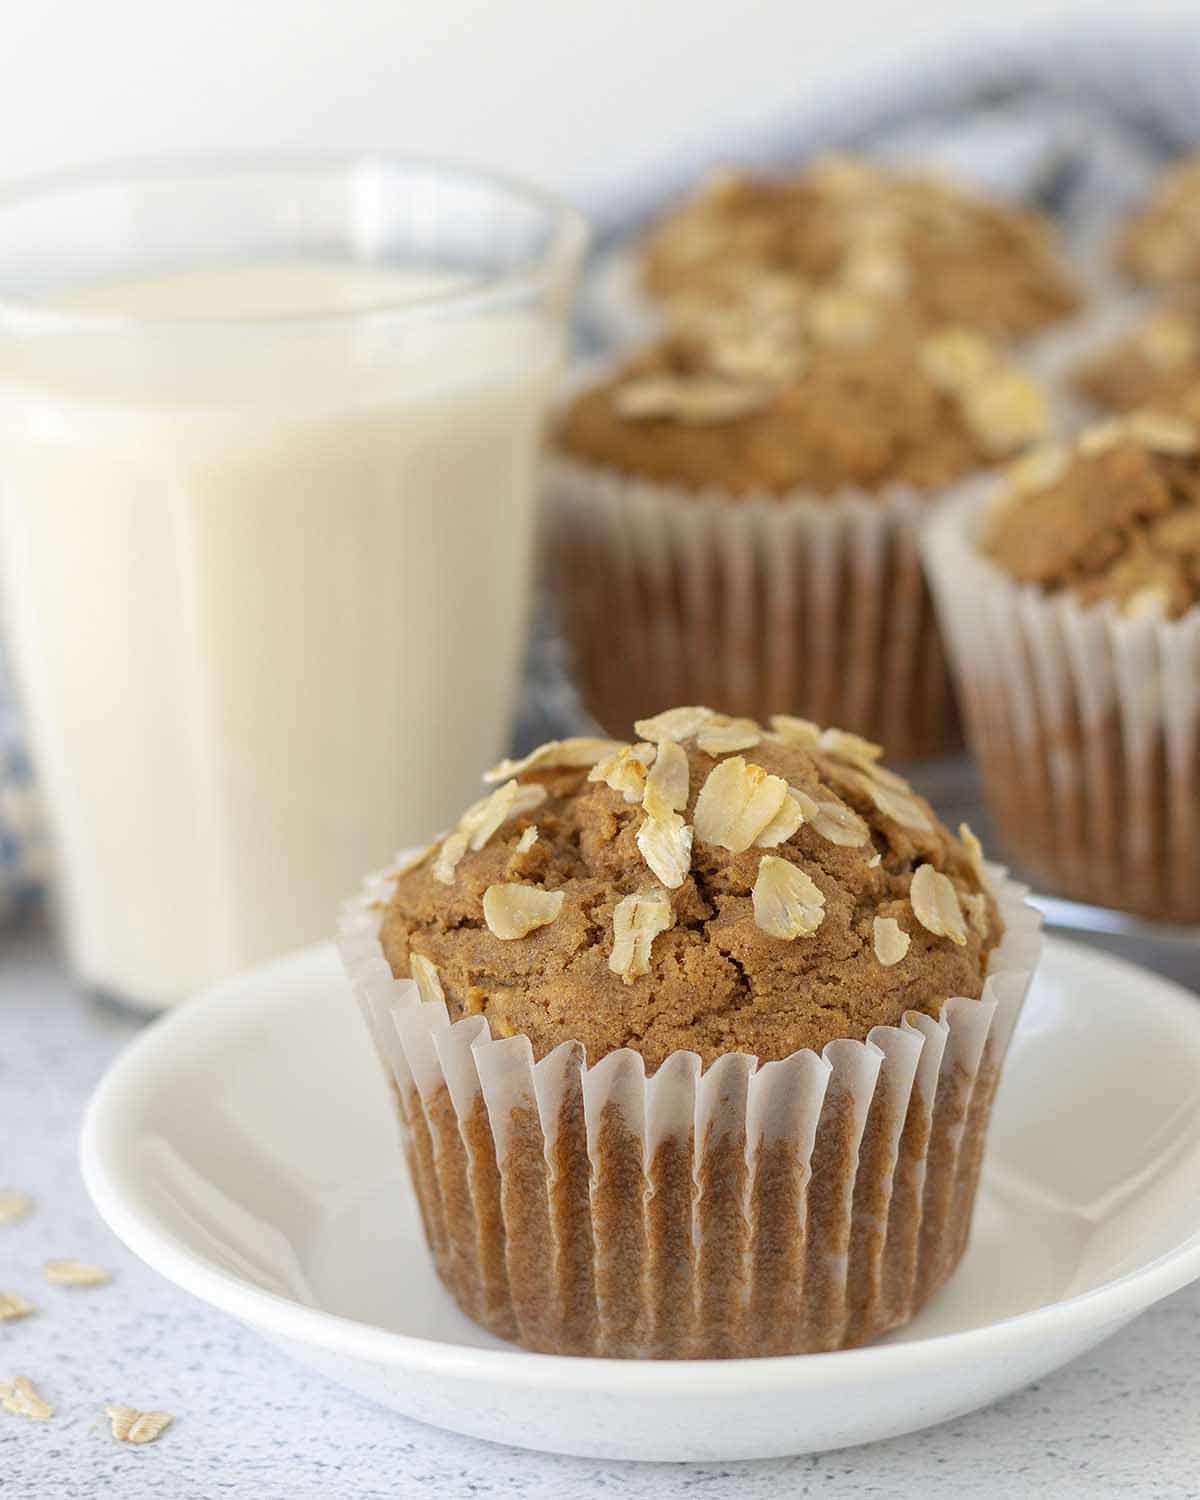 Image shows an oatmeal muffin on a white plate, more muffins sit a cooling rack in the background.